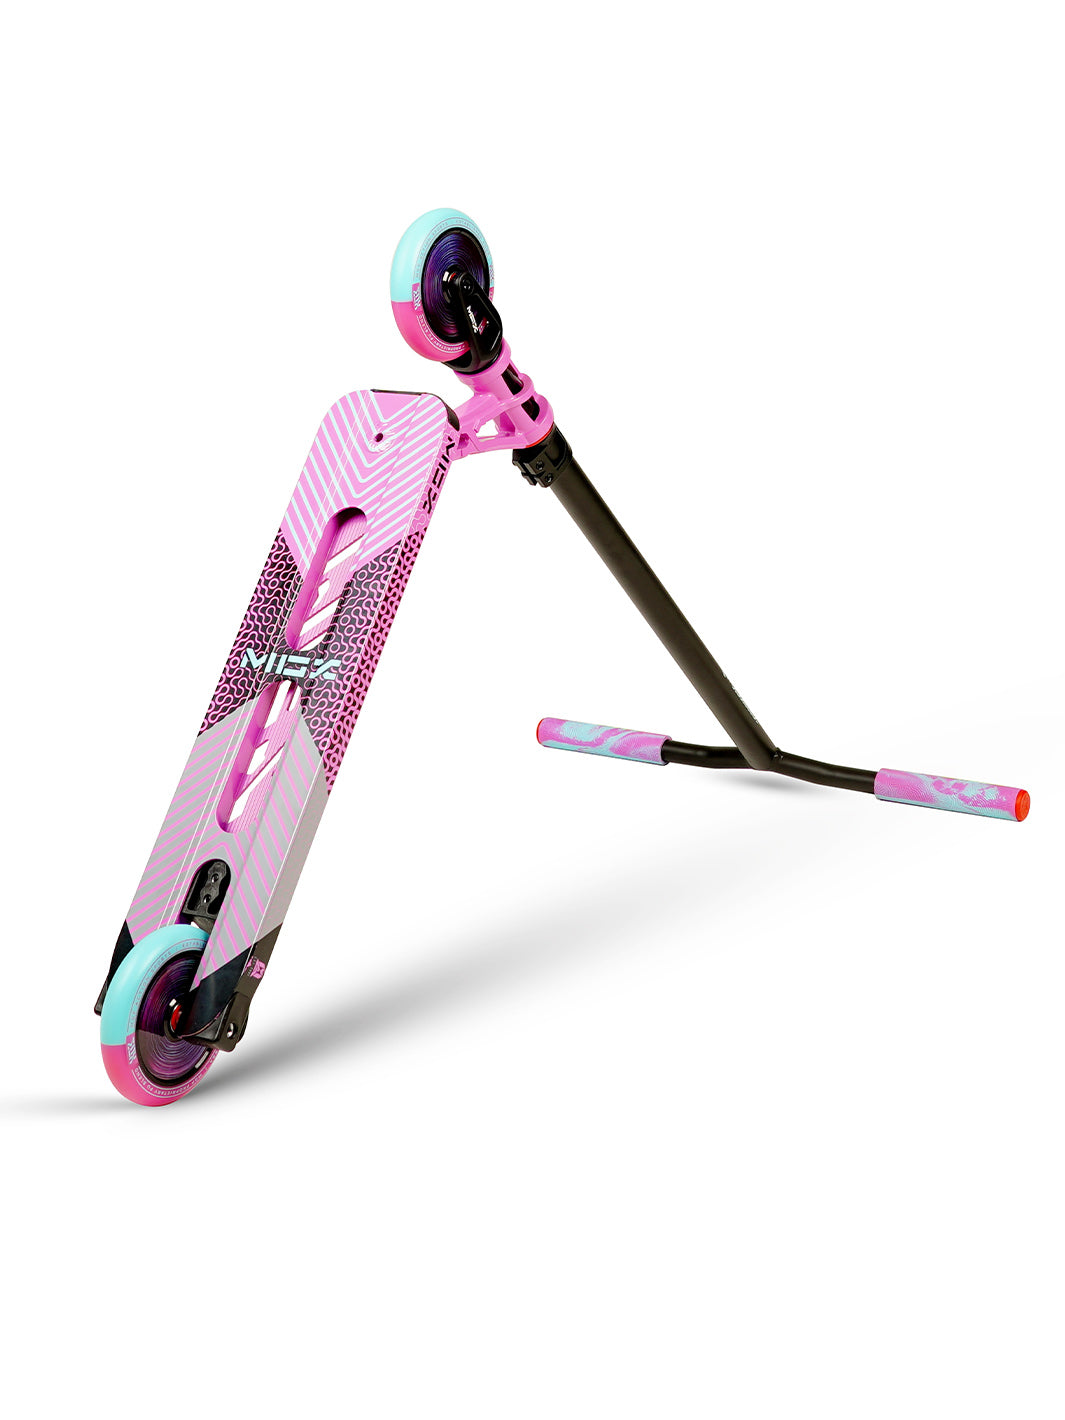 Madd Gear MGP MGX Pro P2 Stunt Scooter Pink Teal Complete Lightweight